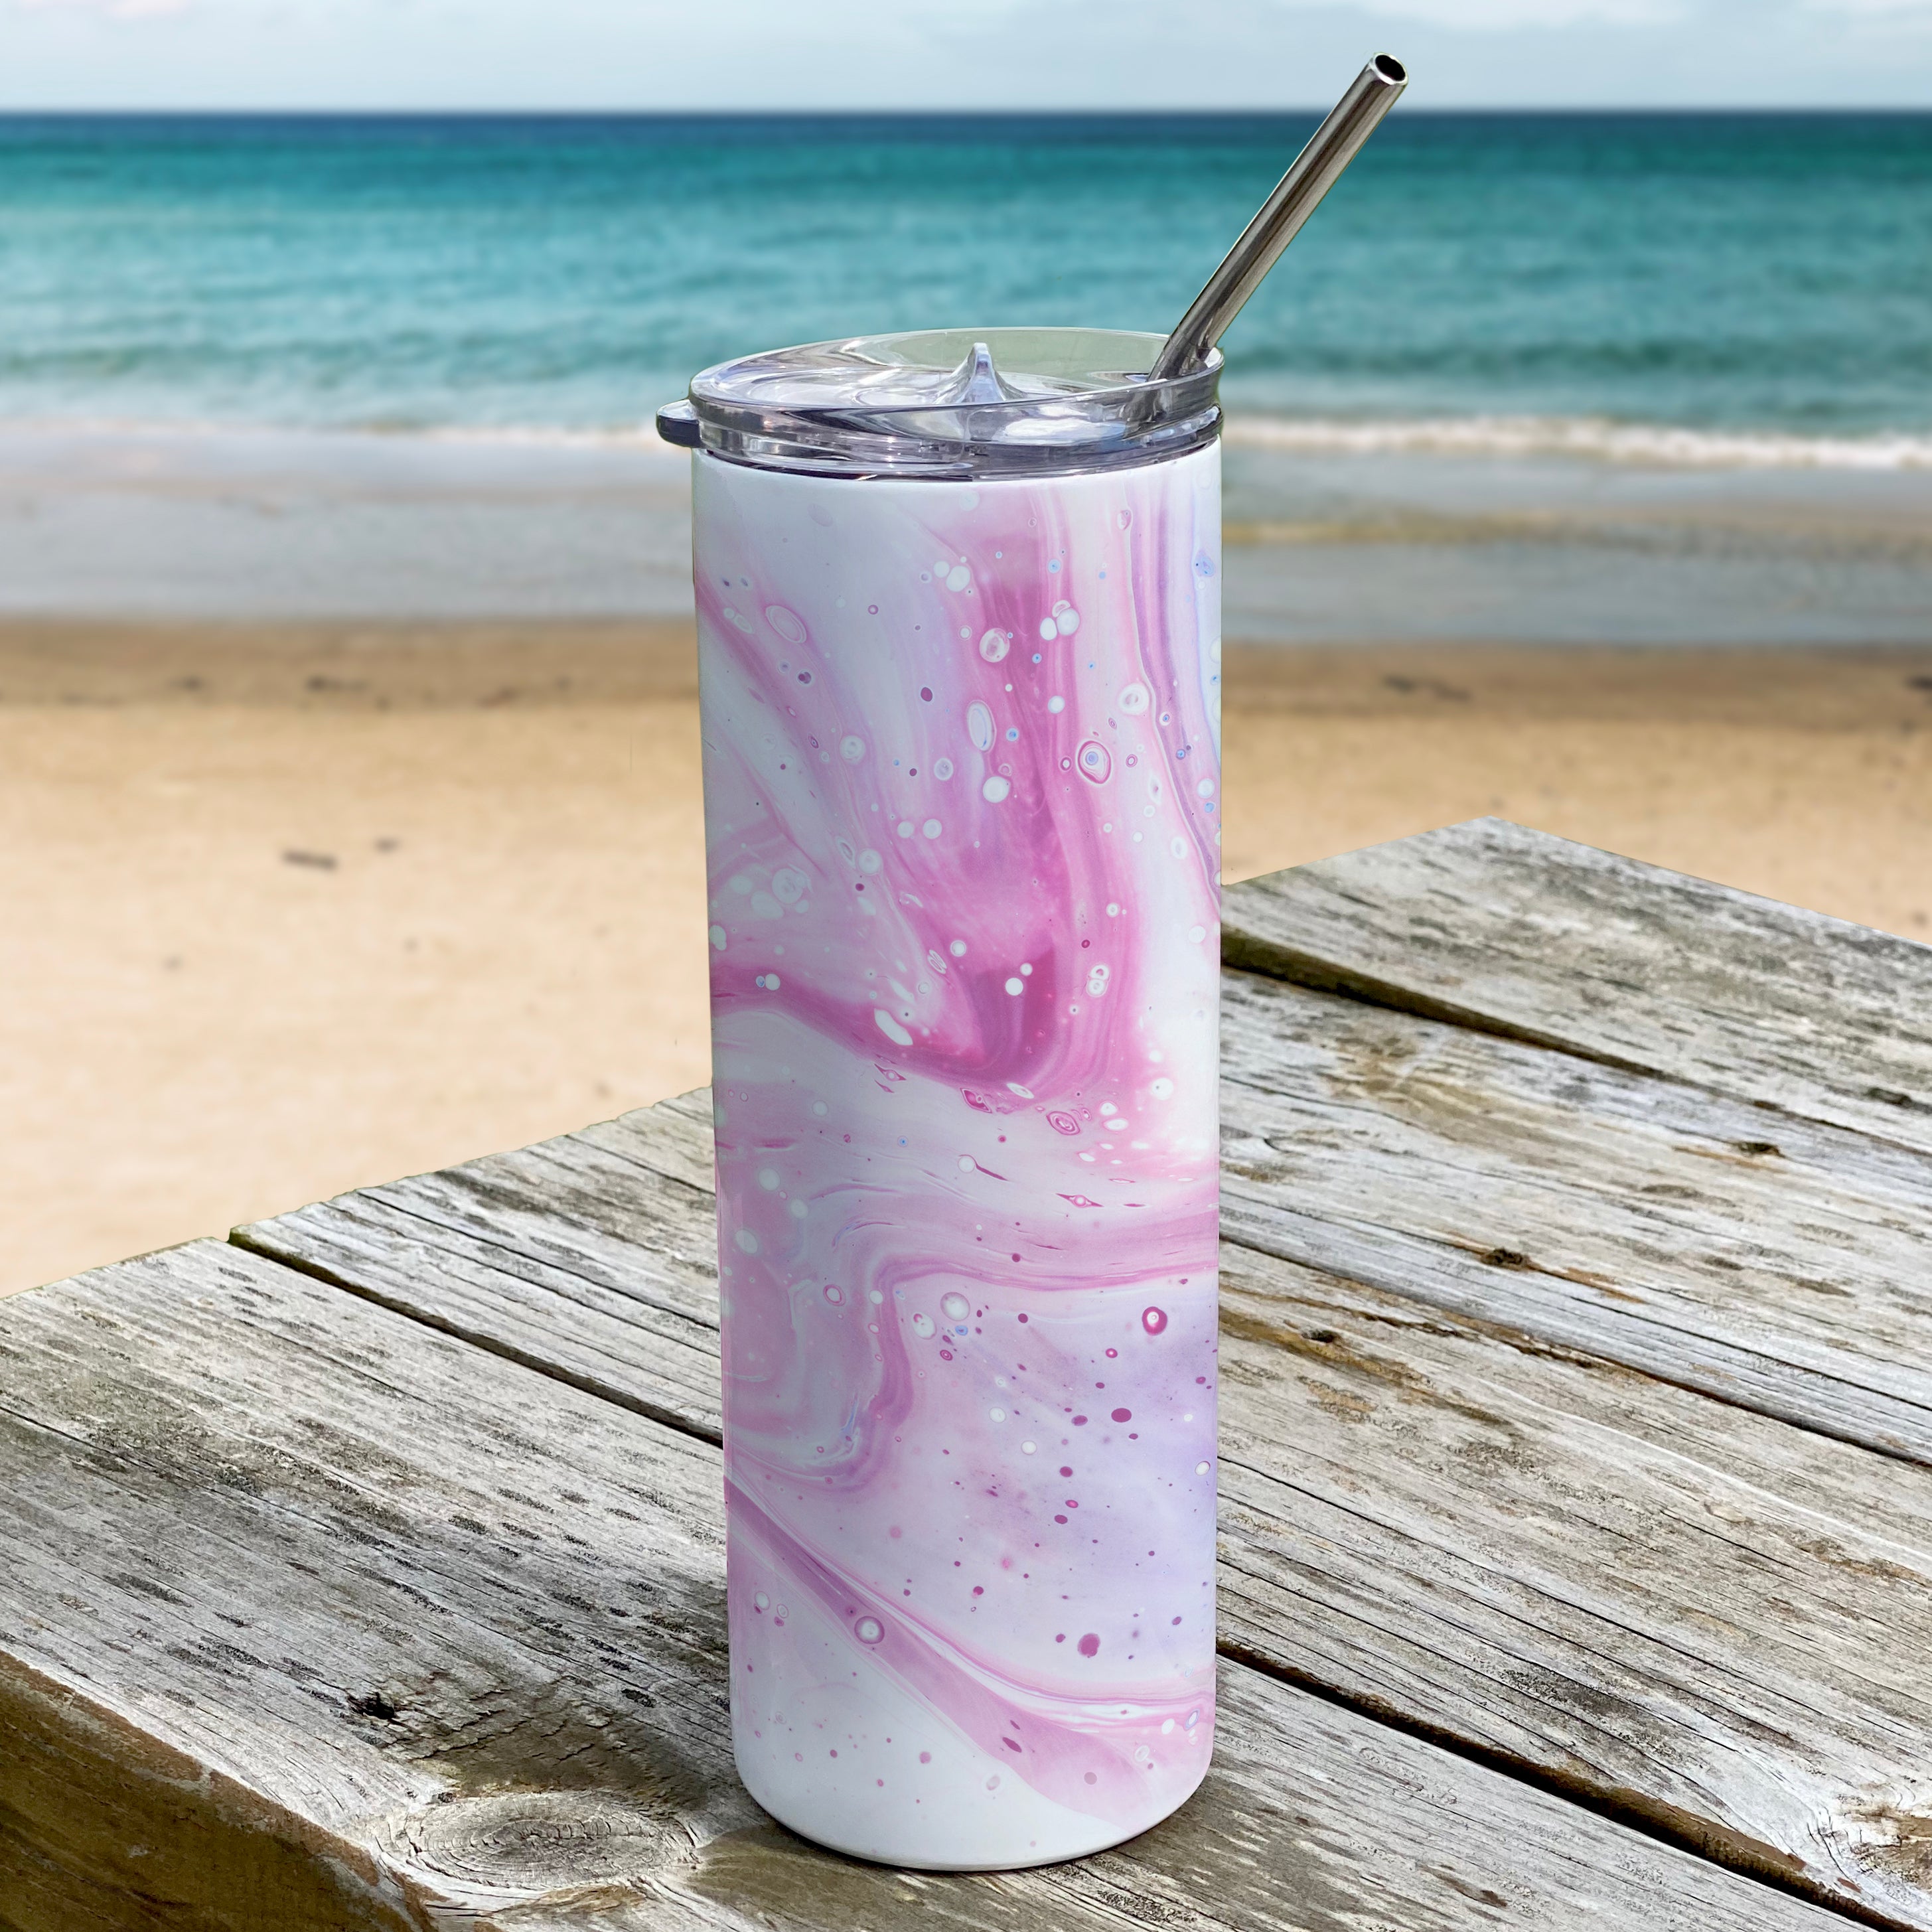 Trend Setters Original (Pink and Blue Marble) 20oz Stainless Steel Travel Tumbler with Straw